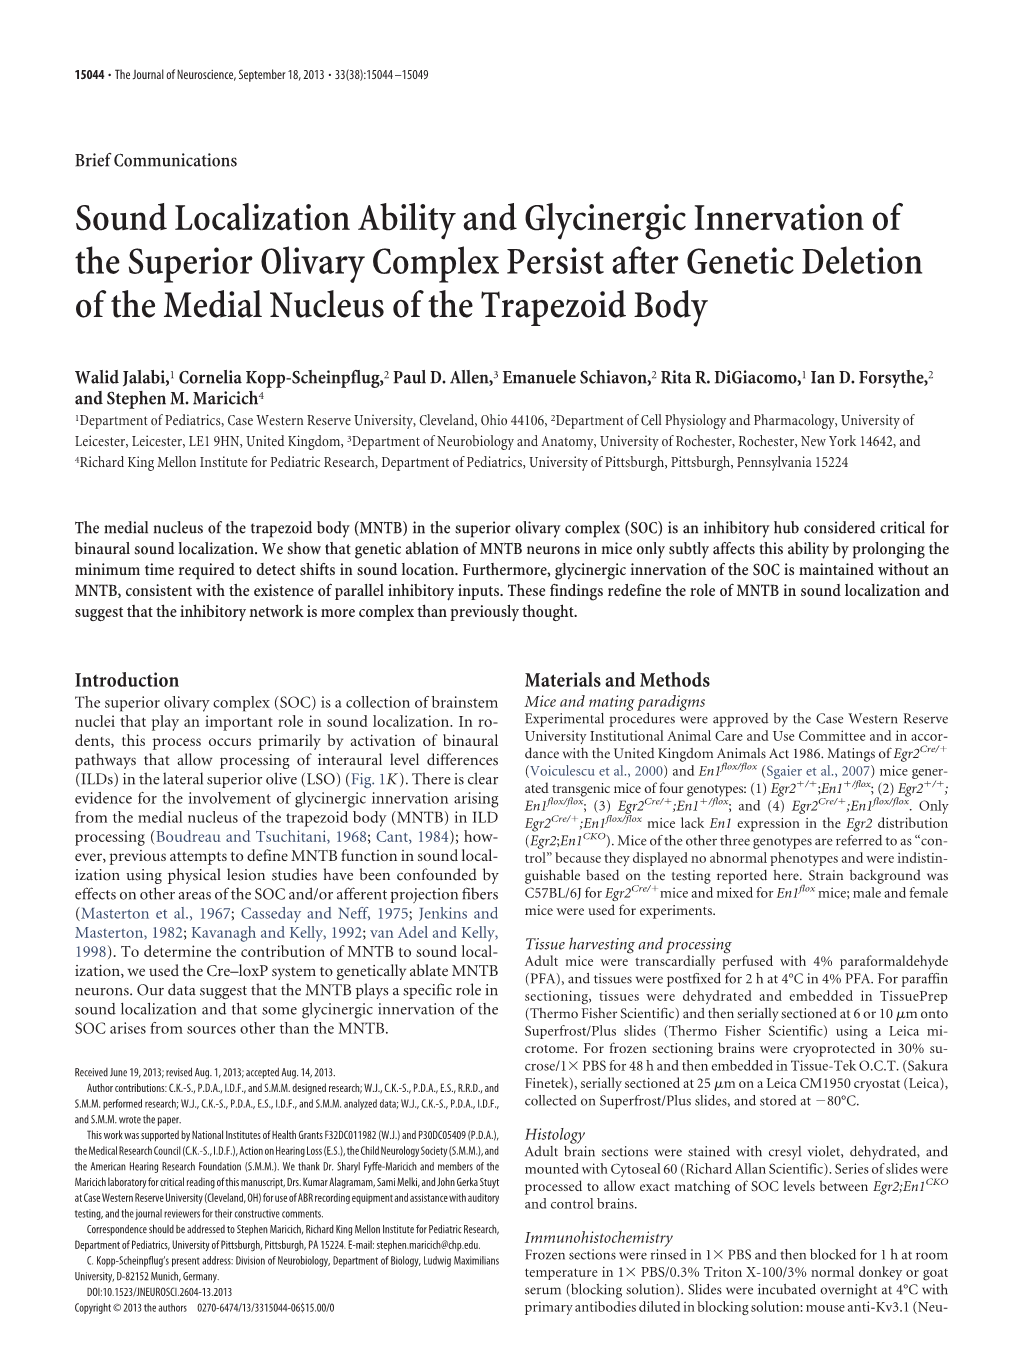 Sound Localization Ability and Glycinergic Innervation of the Superior Olivary Complex Persist After Genetic Deletion of the Medial Nucleus of the Trapezoid Body